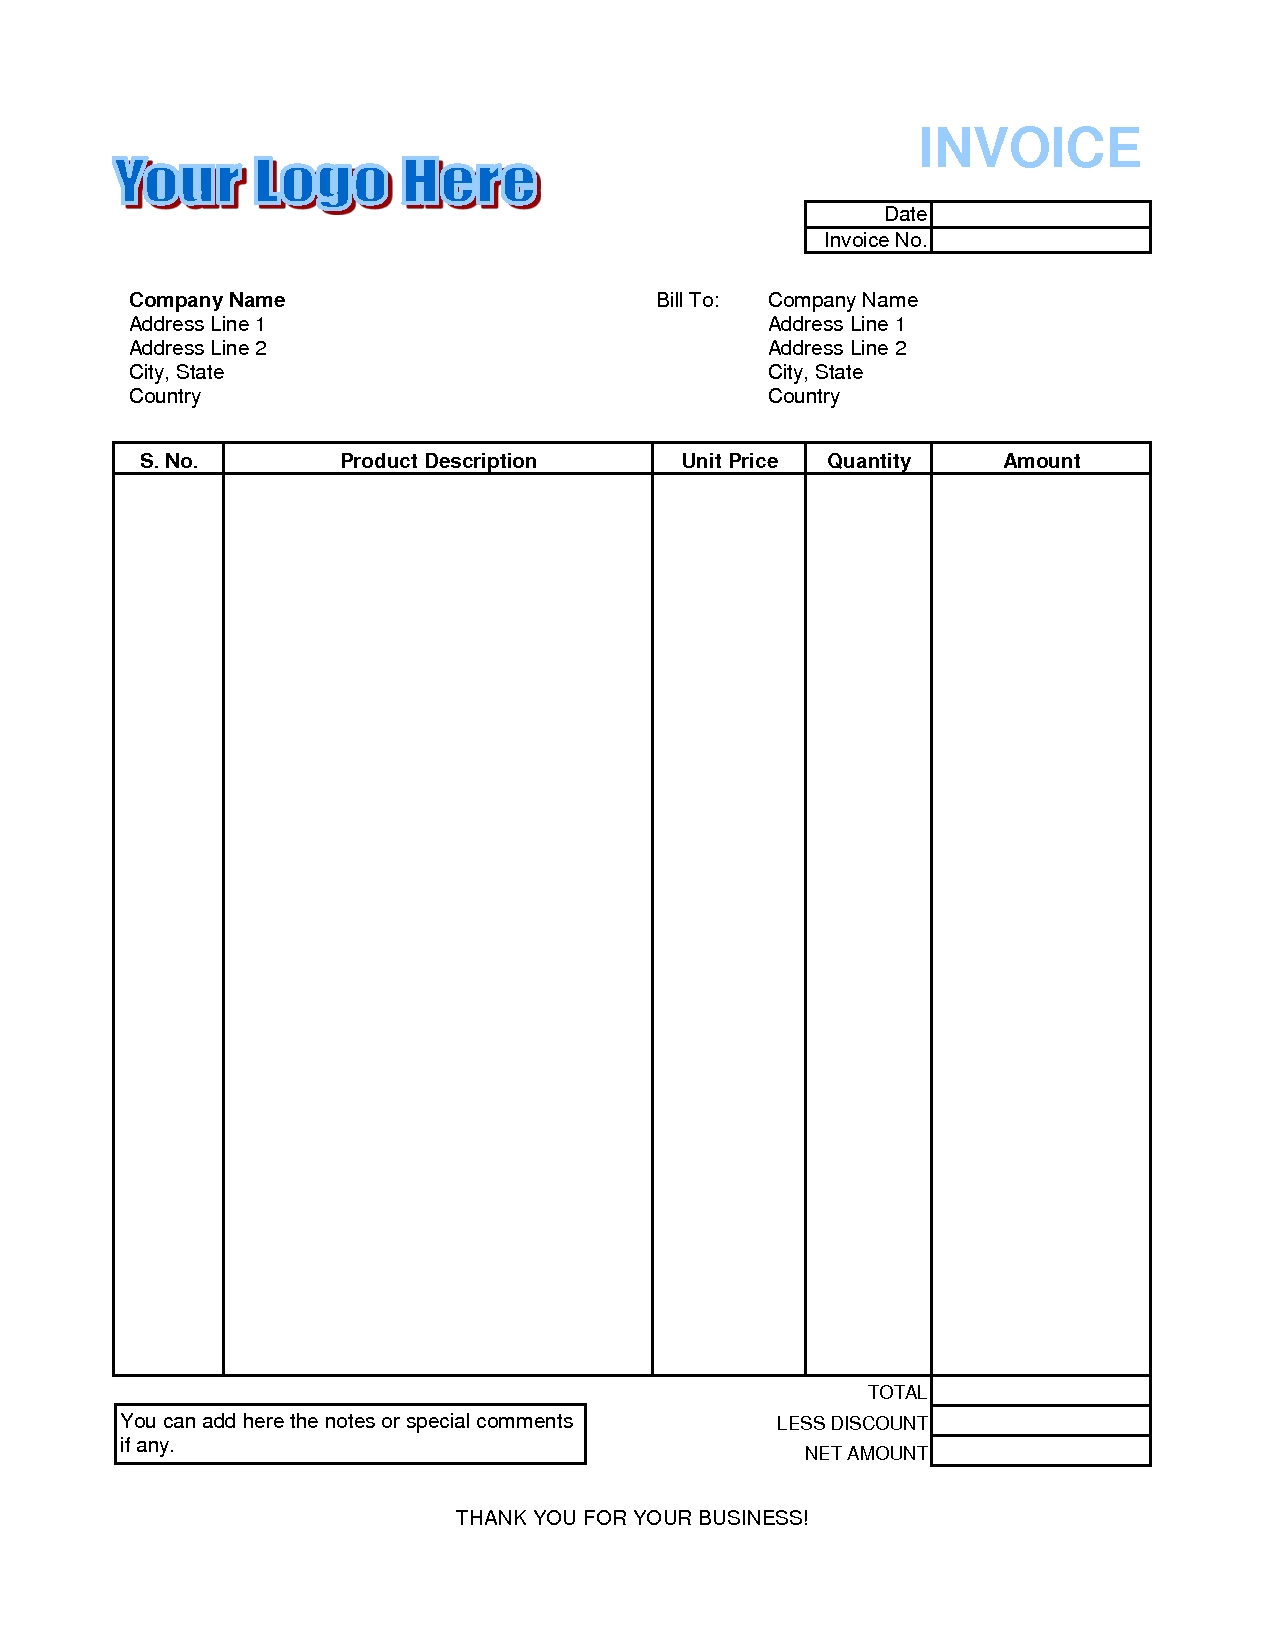 best photos of invoice format in excel excel service invoice invoice format in excel download